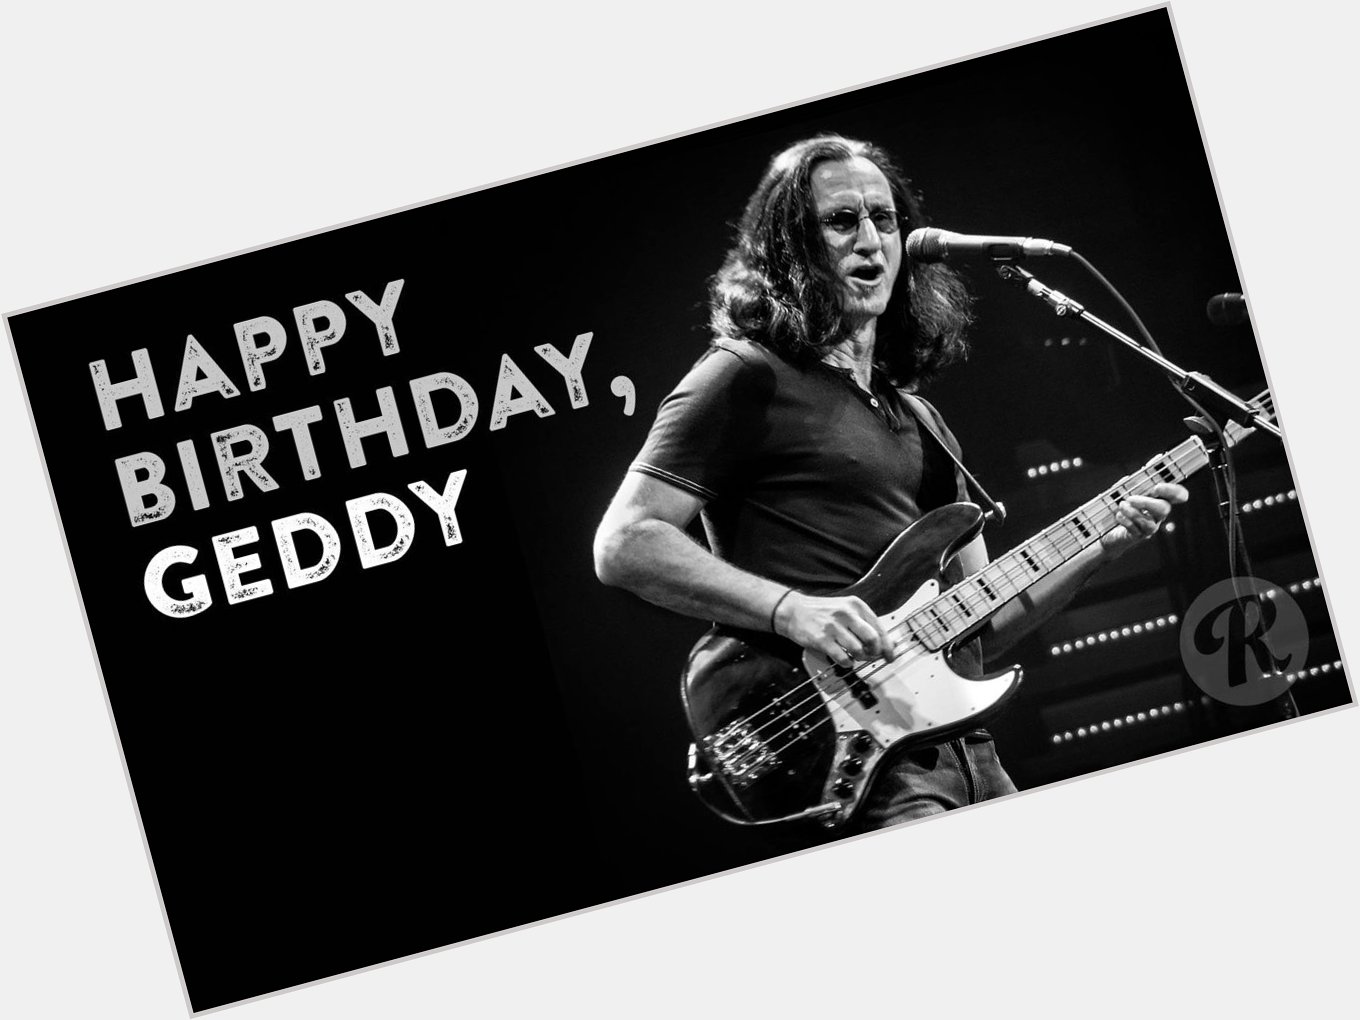 Happy birthday, Geddy Lee! \"Lead bass\" for Geddy\s ingenuity has changed the world of bass playing. 